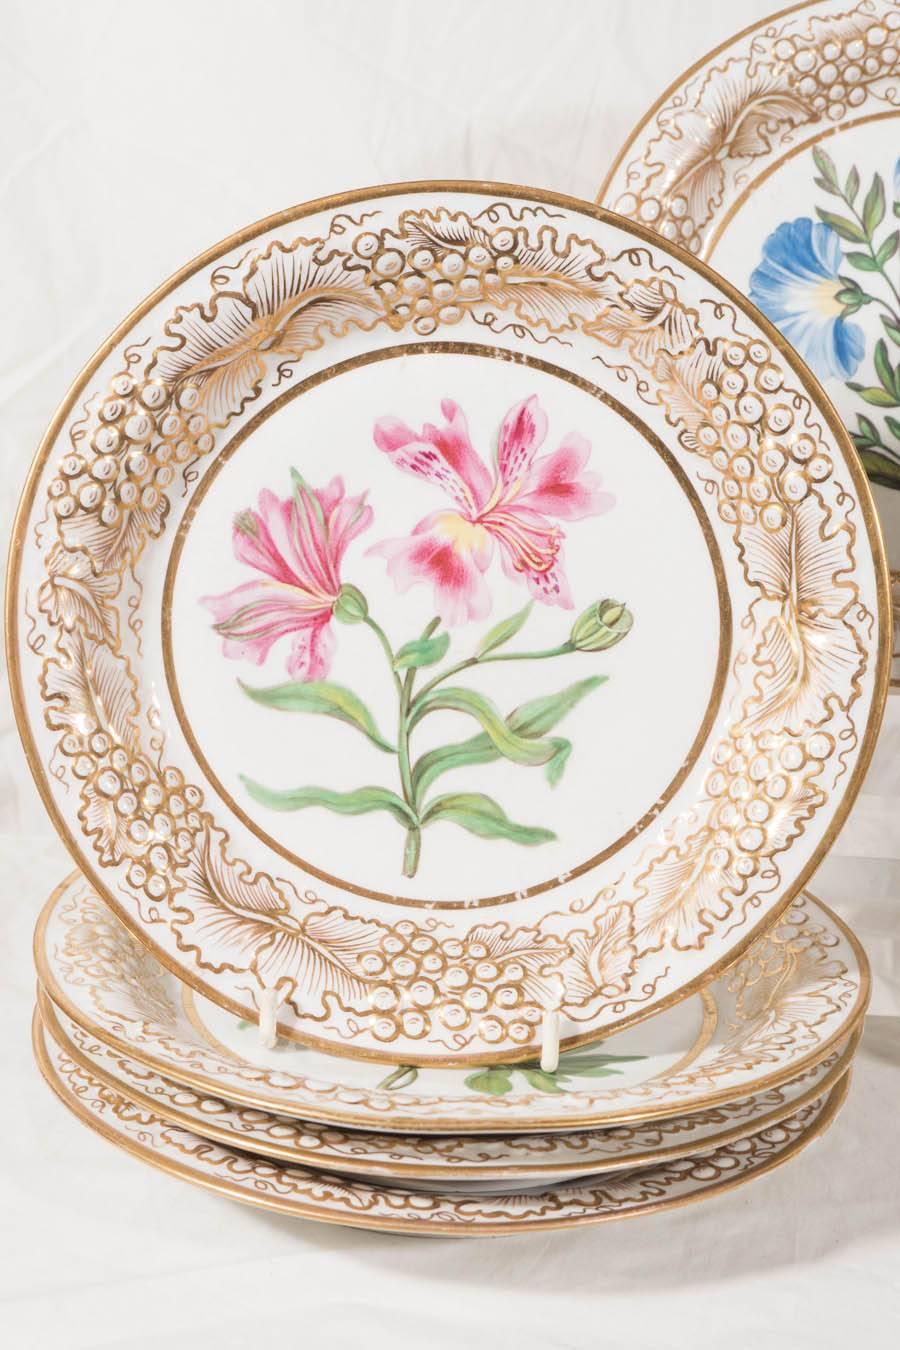 Bardith has been in business for 52 years. This service is one of the most beautiful that we have ever owned. Made by a small, but important, English factory, Wilson, which made some of the finest porcelains and pottery of the early 19th century.